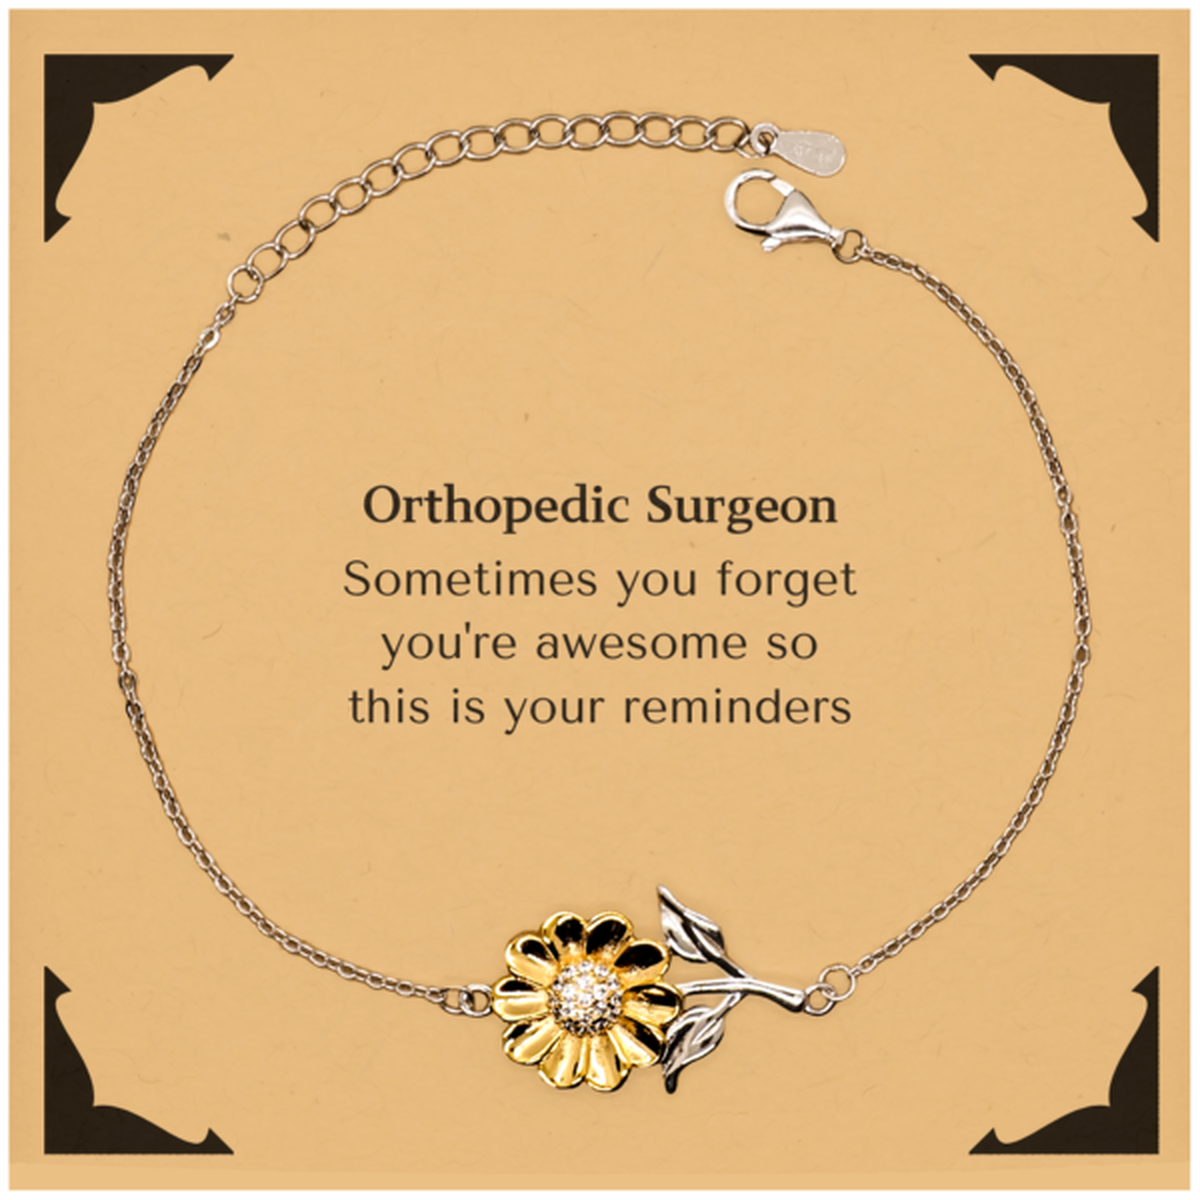 Sentimental Orthopedic Surgeon Sunflower Bracelet, Orthopedic Surgeon Sometimes you forget you're awesome so this is your reminders, Graduation Christmas Birthday Gifts for Orthopedic Surgeon, Men, Women, Coworkers